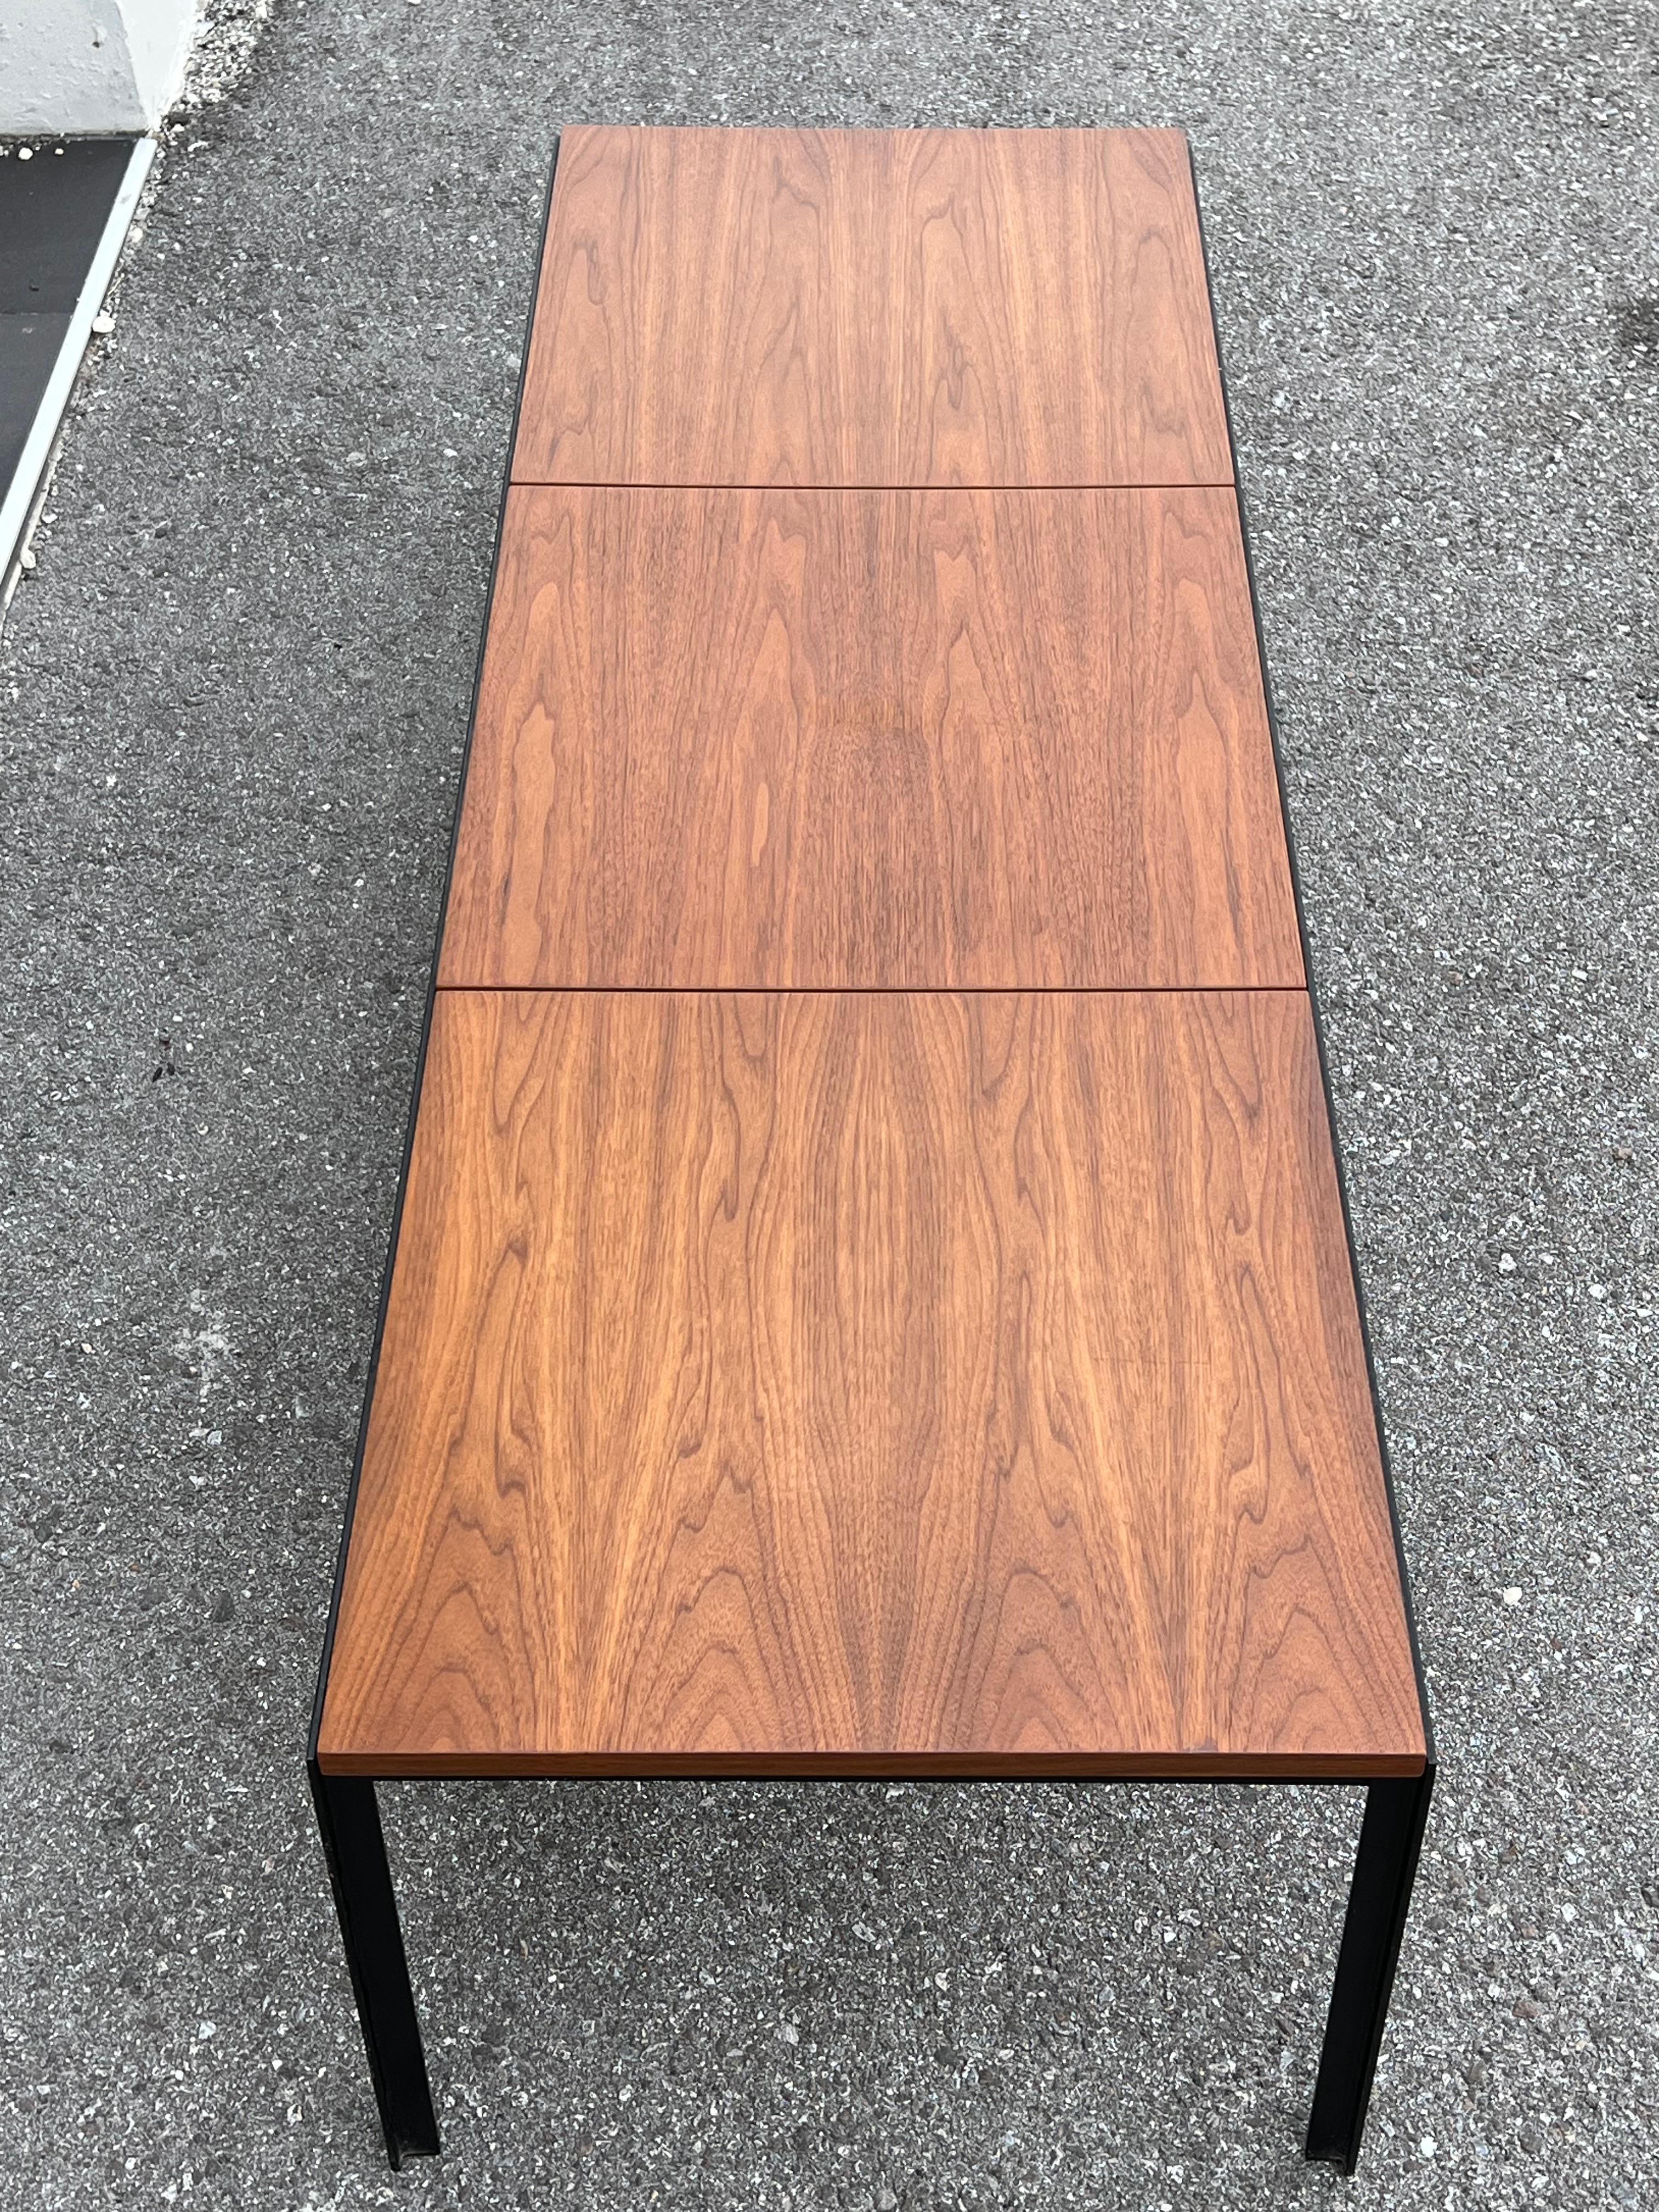 Mid-Century Modern A Classic Knoll Coffee Table Or Bench With Angle Iron Frame Ca' 1960's For Sale